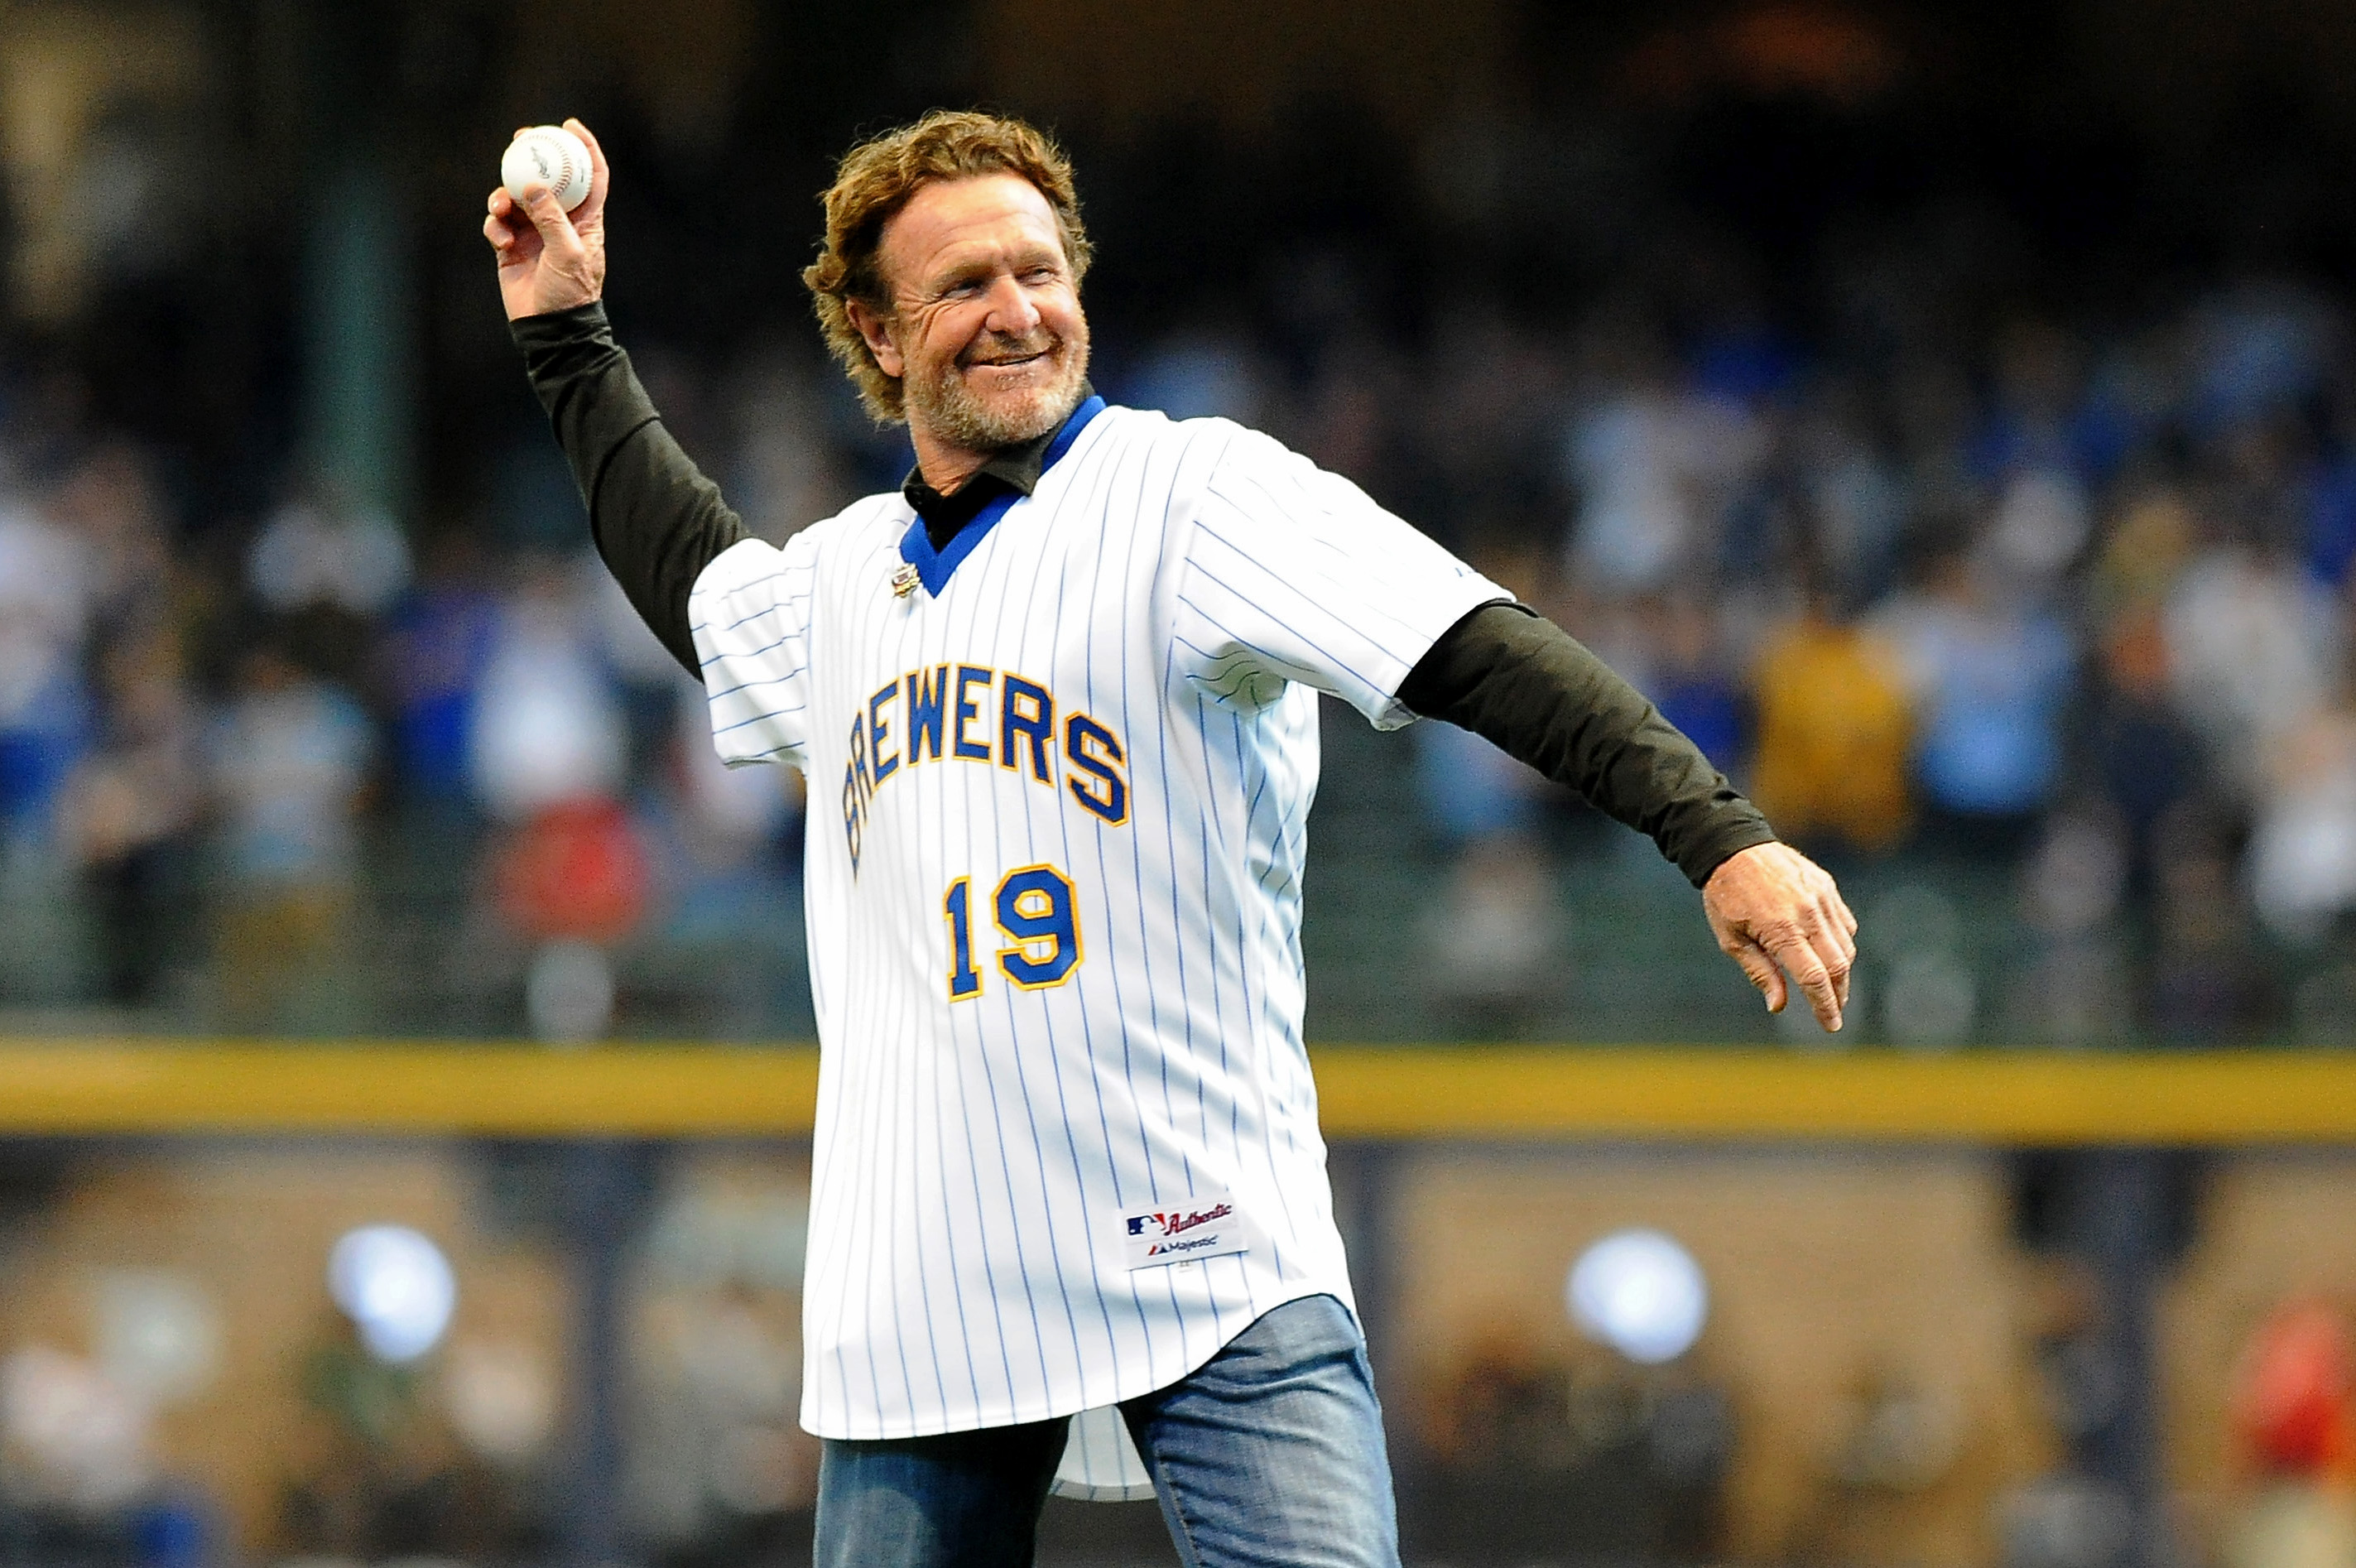 Robin Yount Milwaukee Brewers 1999 Hall of Fame Induction 8x10